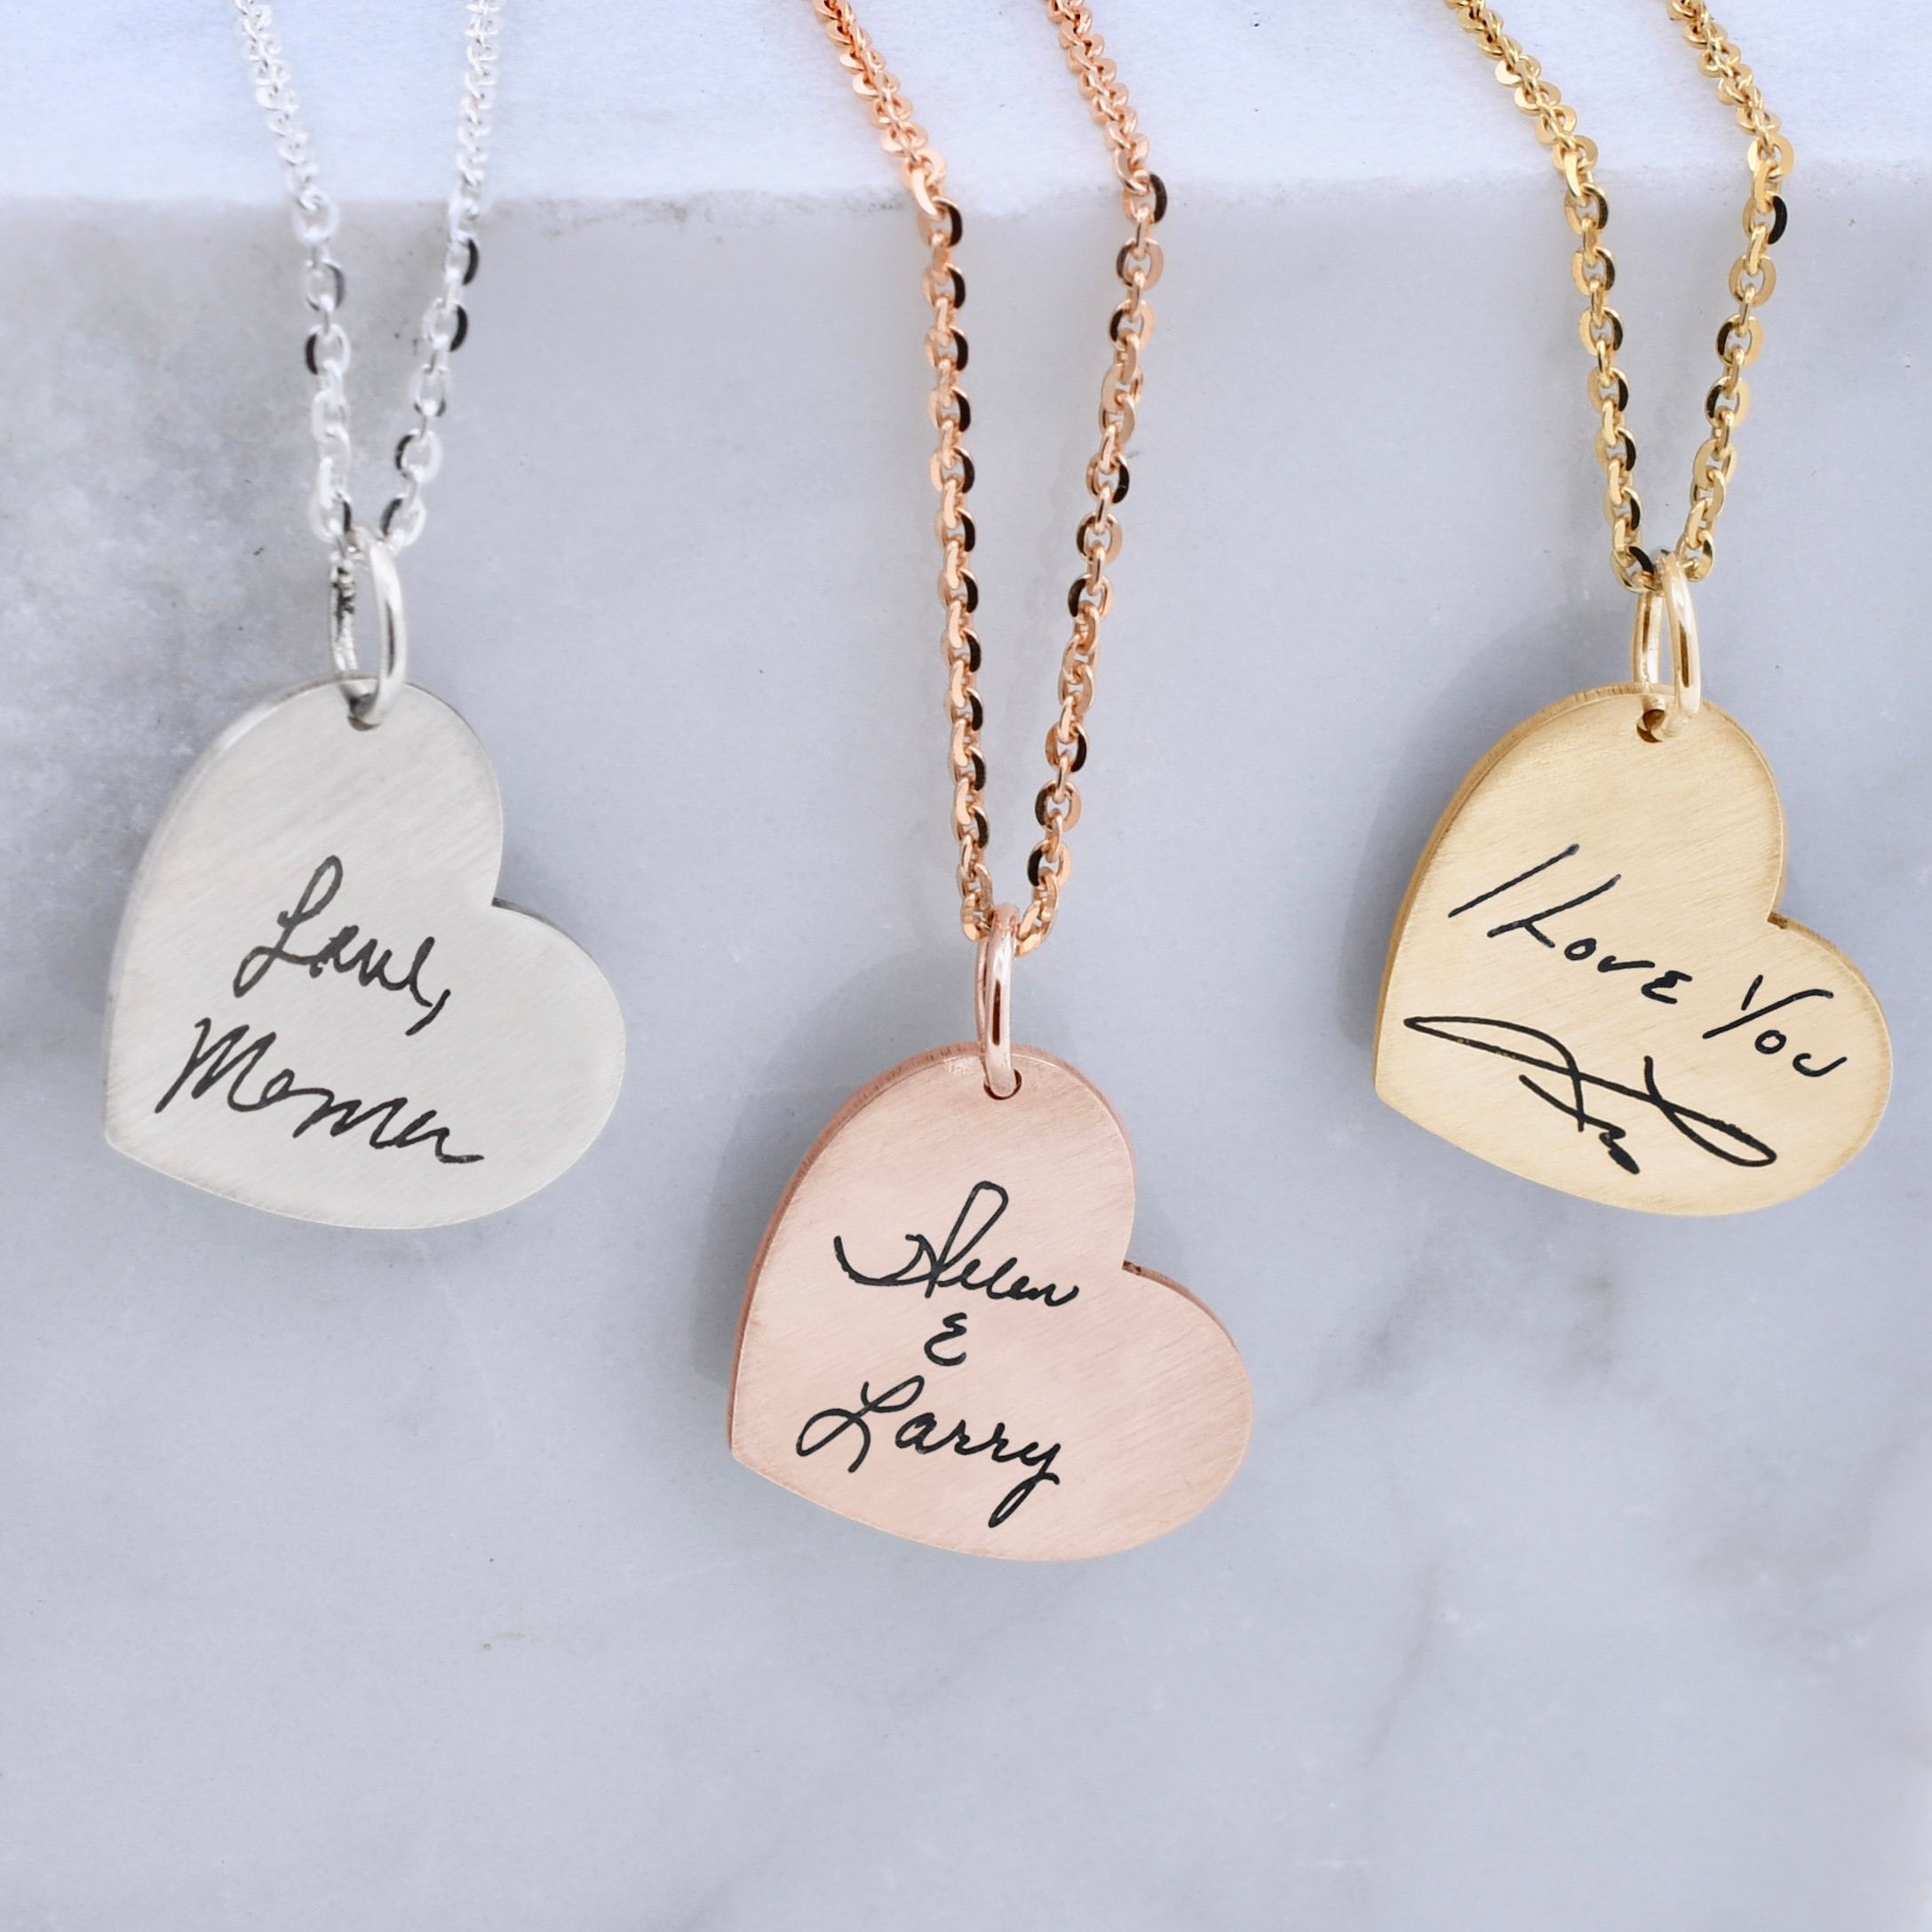 Personalised Heart Necklaces | Bloom Boutique